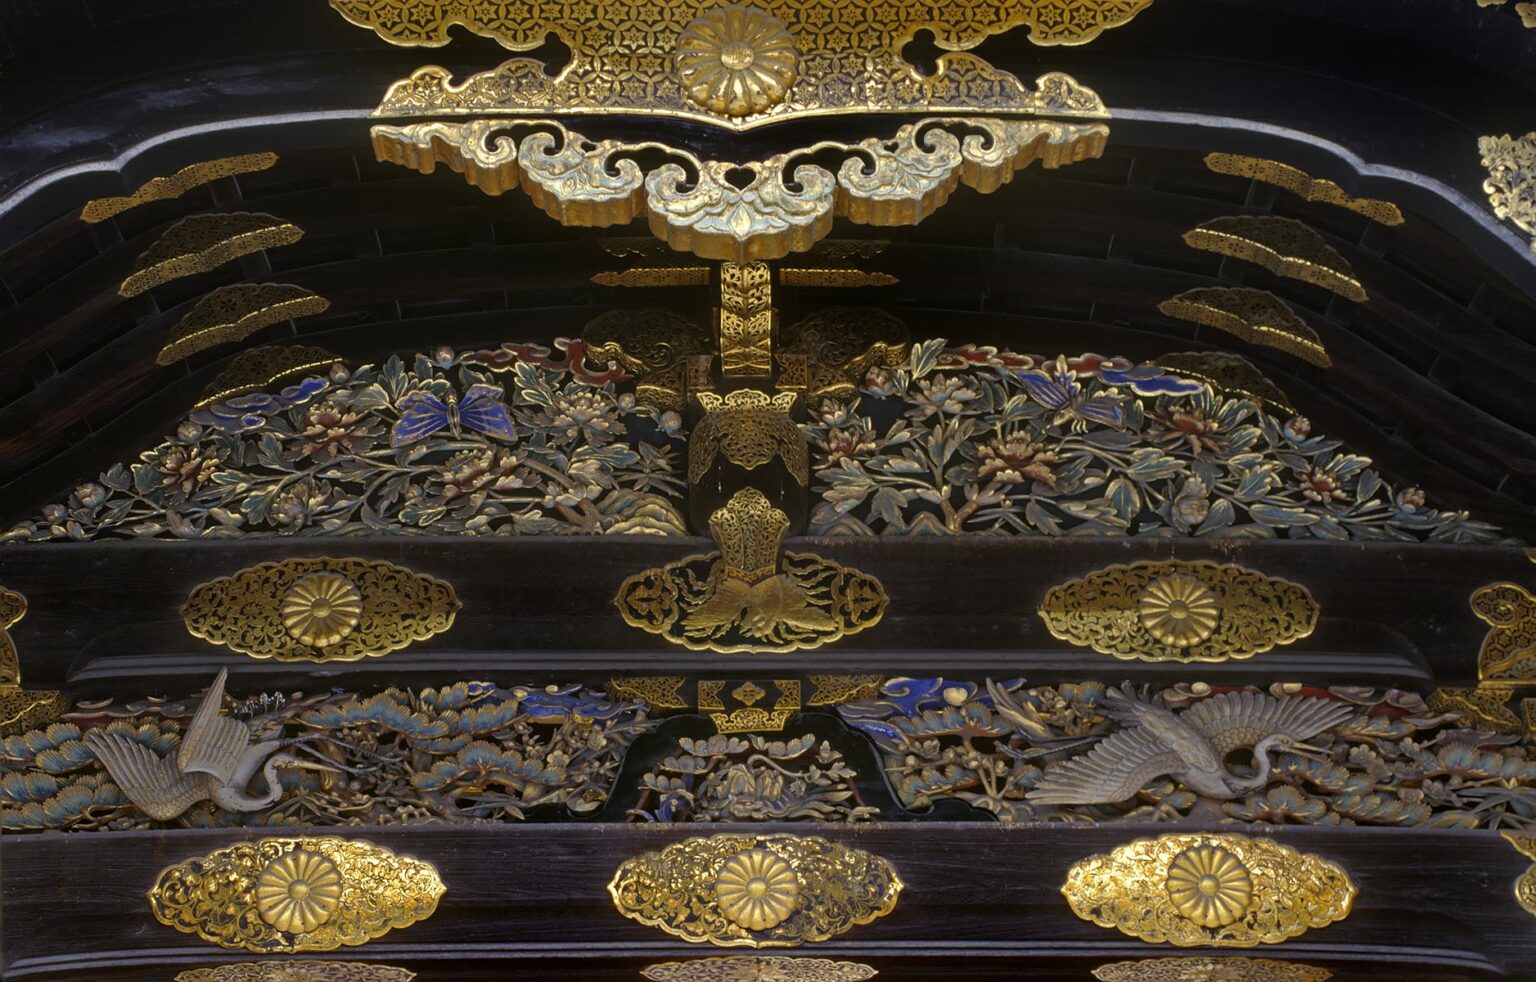 Elaborately carved transom of main gate of NIJO CASTLE (built in 1603 by HIDEYOSHI) - KYOTO, JAPAN